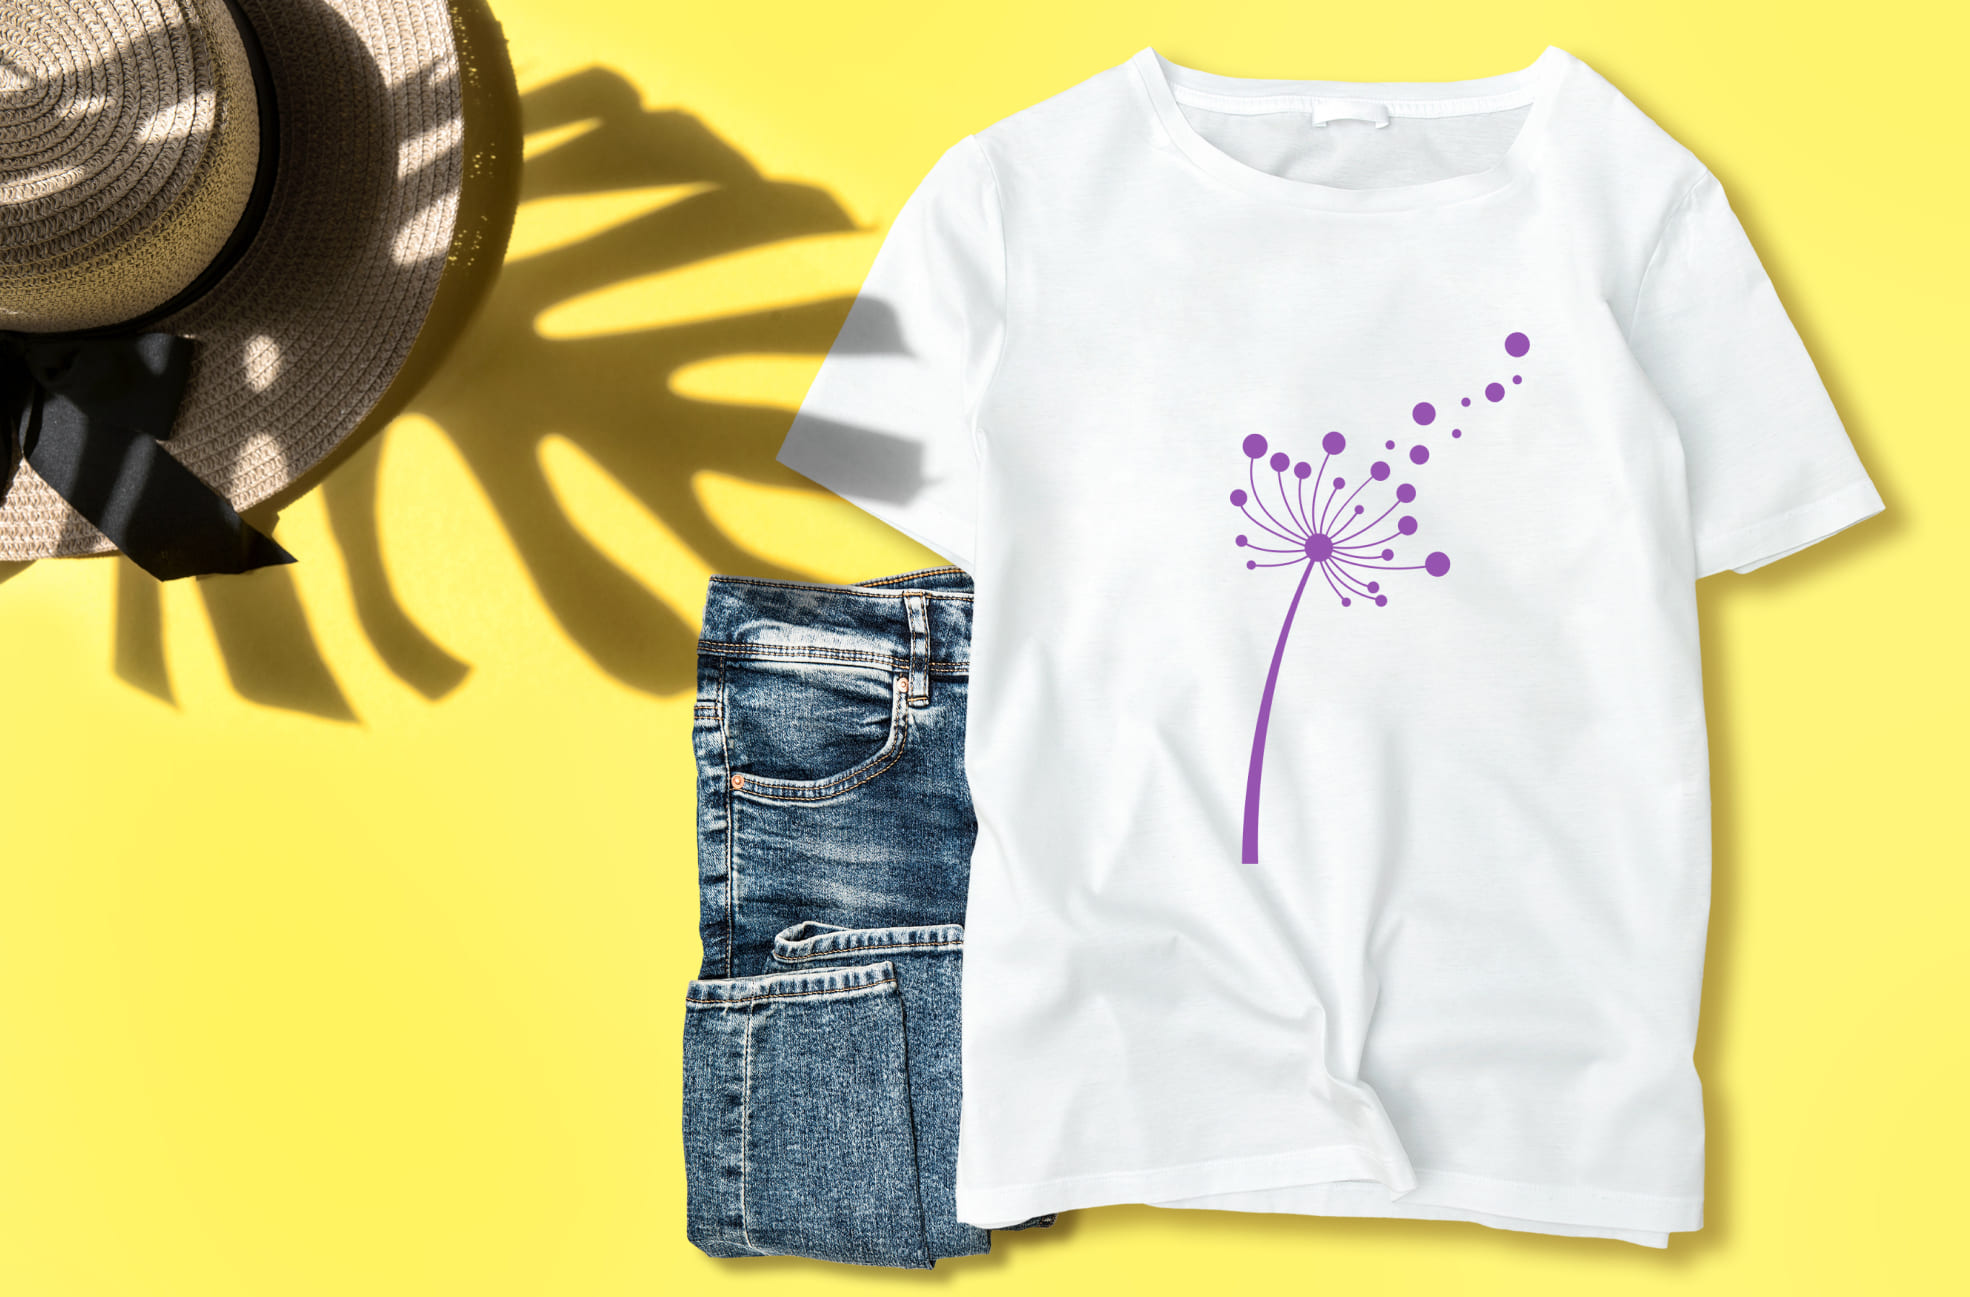 Image of a t-shirt with colorful dandelion print in purple.